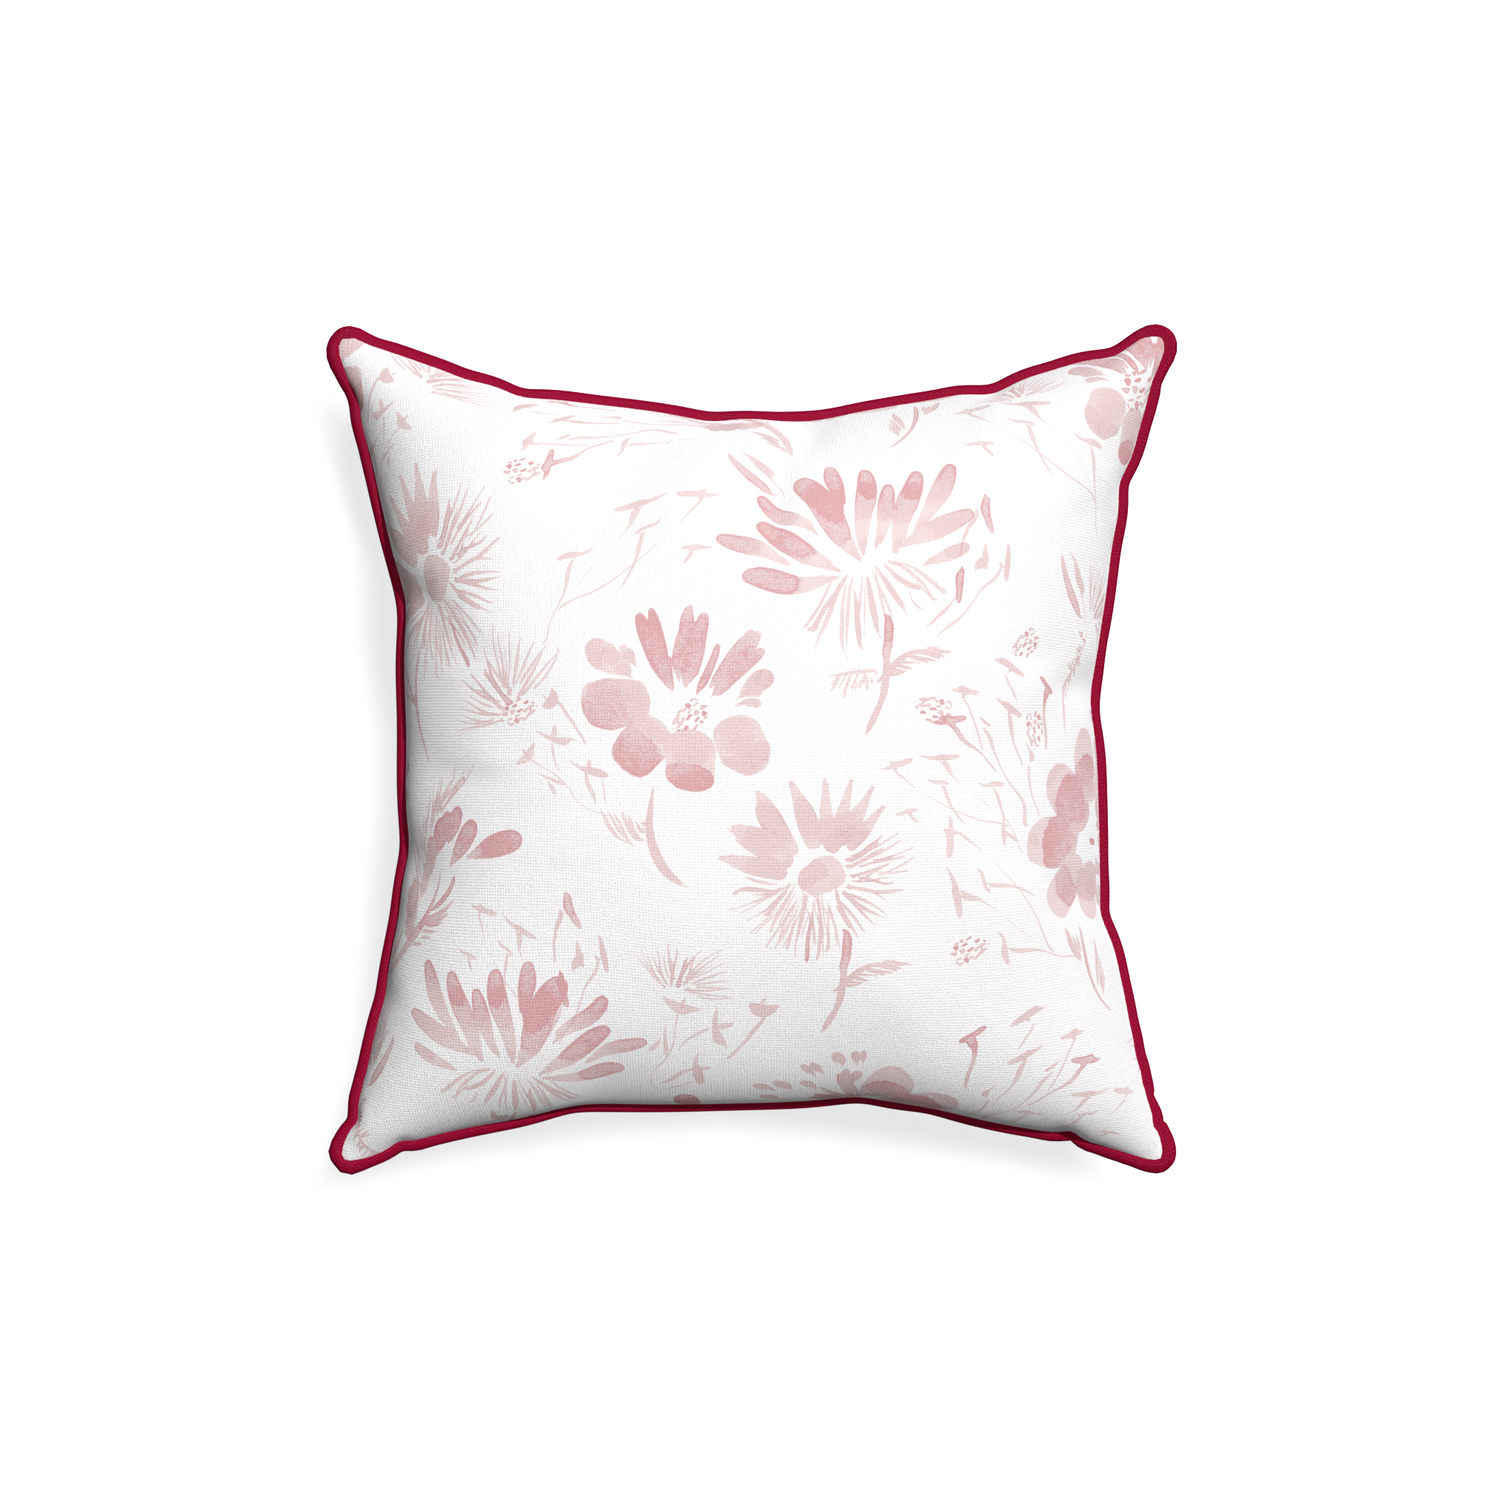 18-square blake custom pink floralpillow with raspberry piping on white background